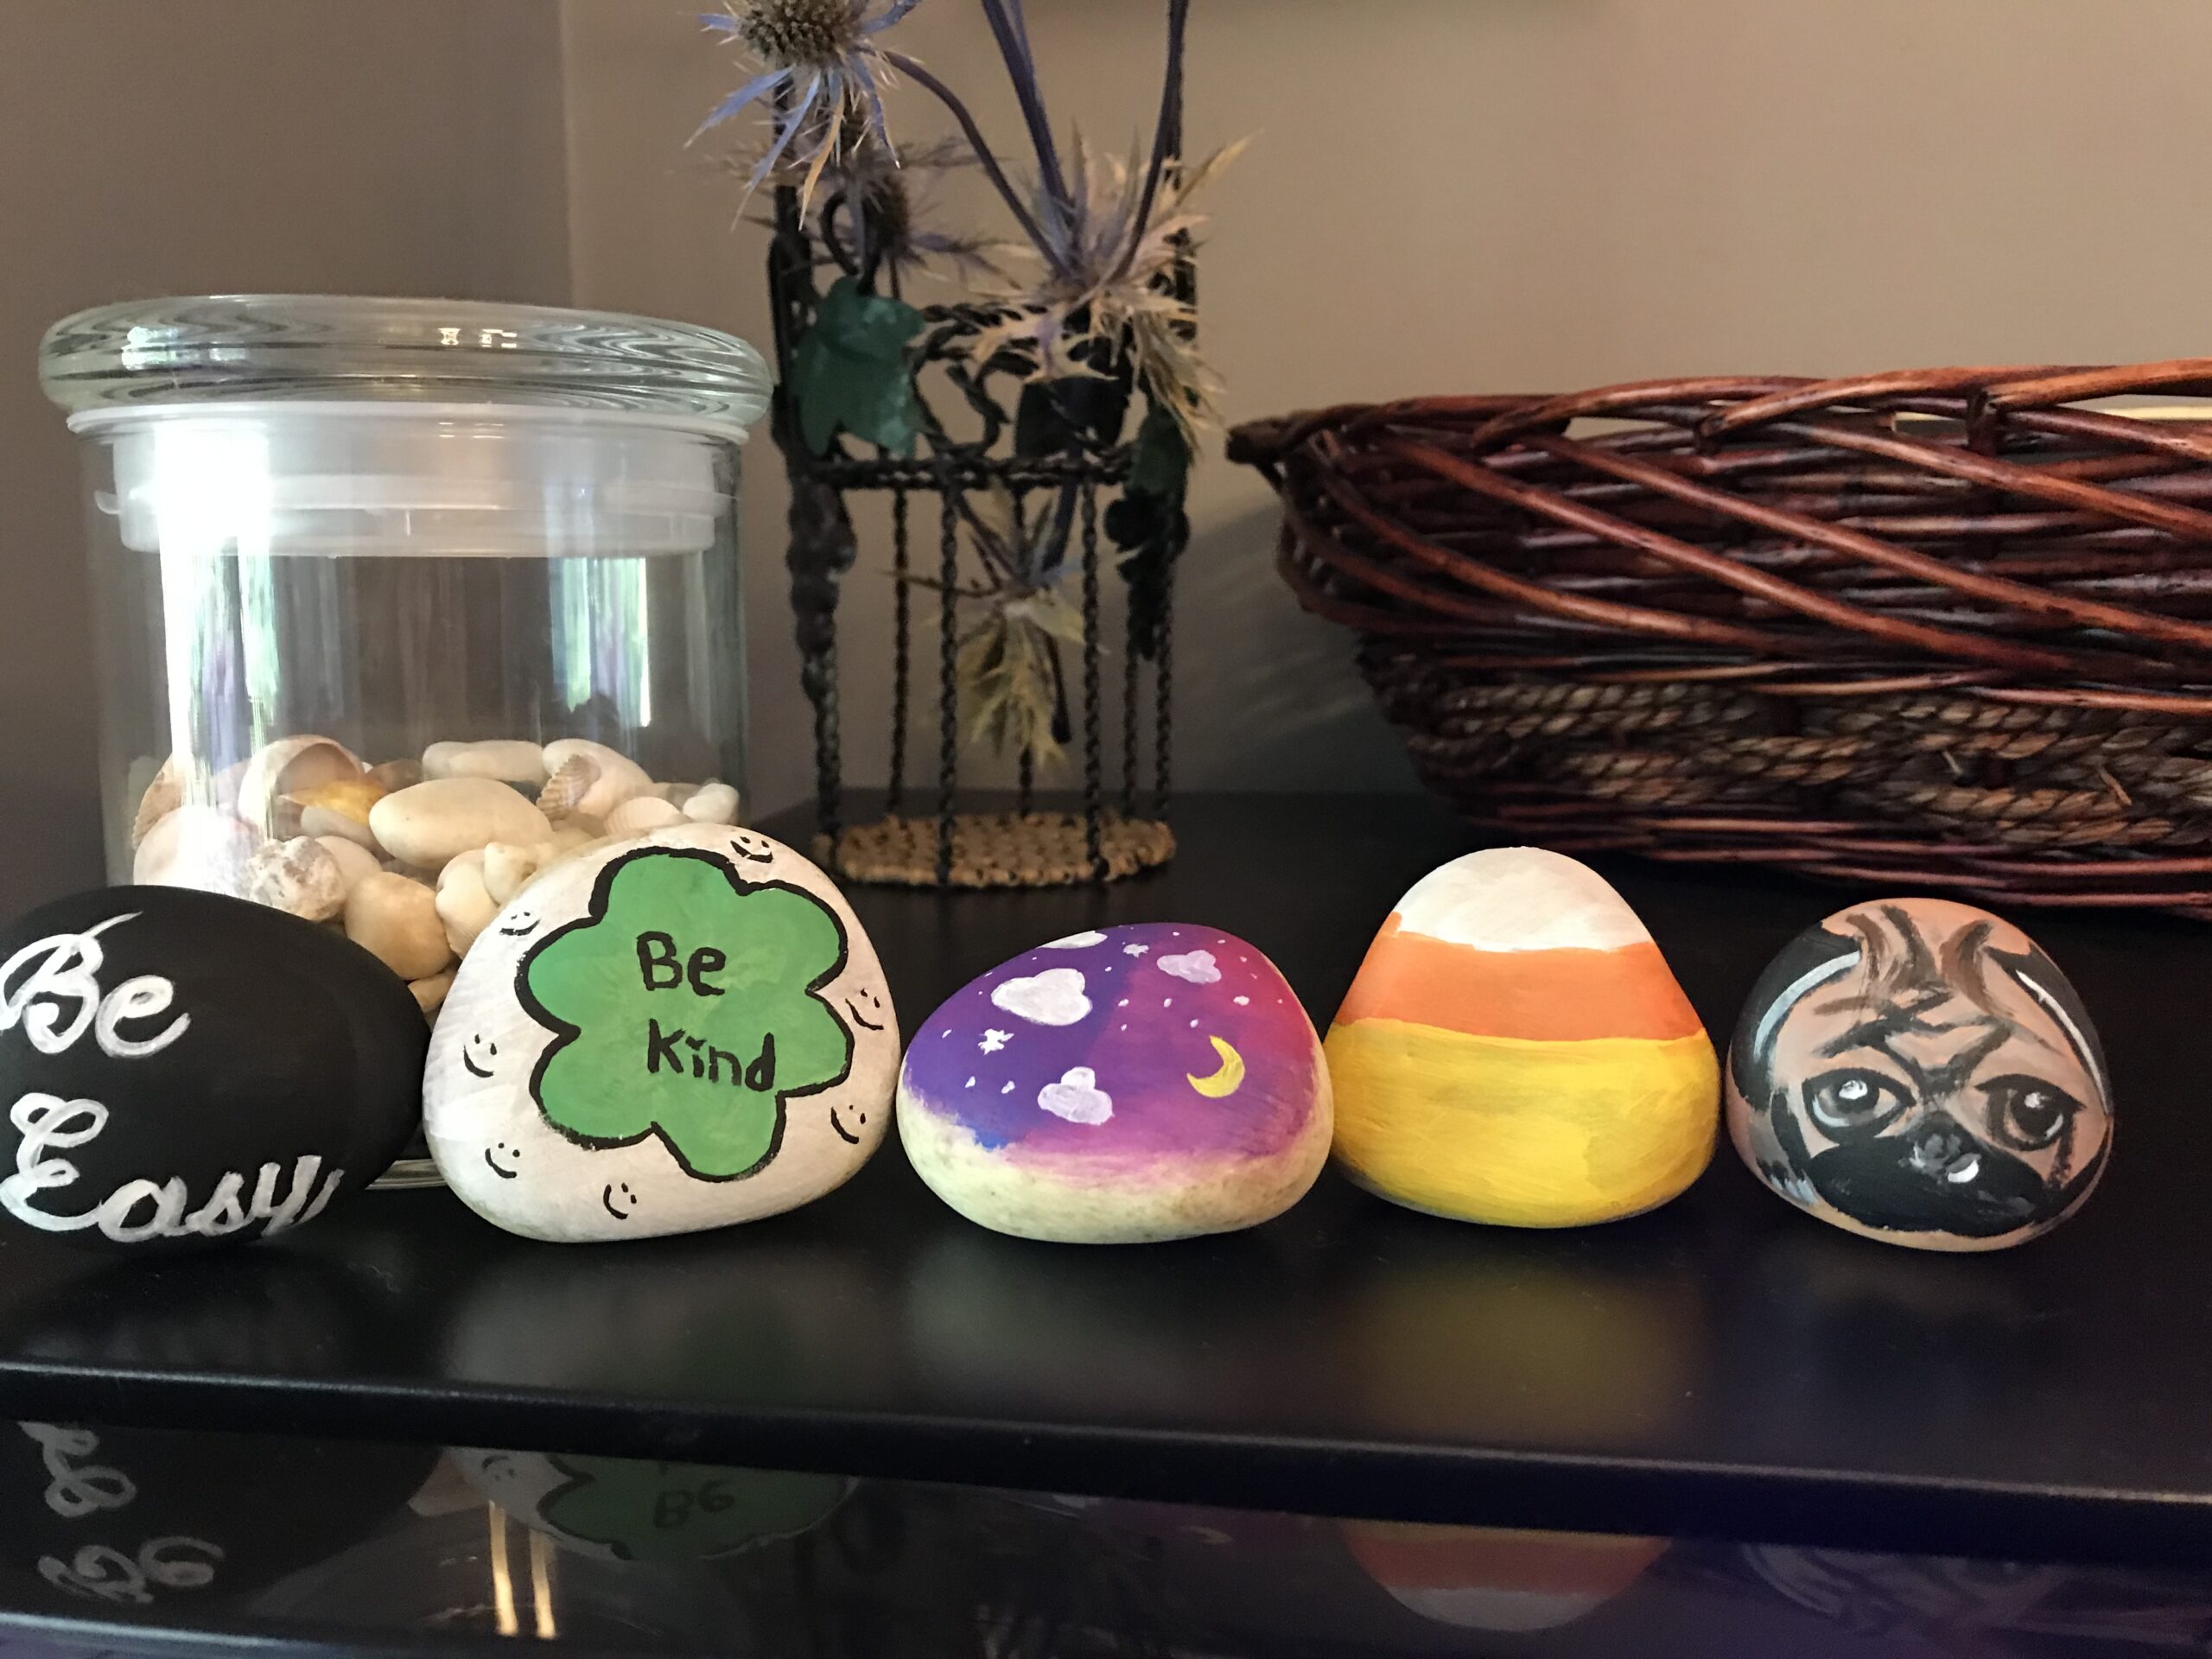 Handpainted kindness rocks made by Brookfield residents.